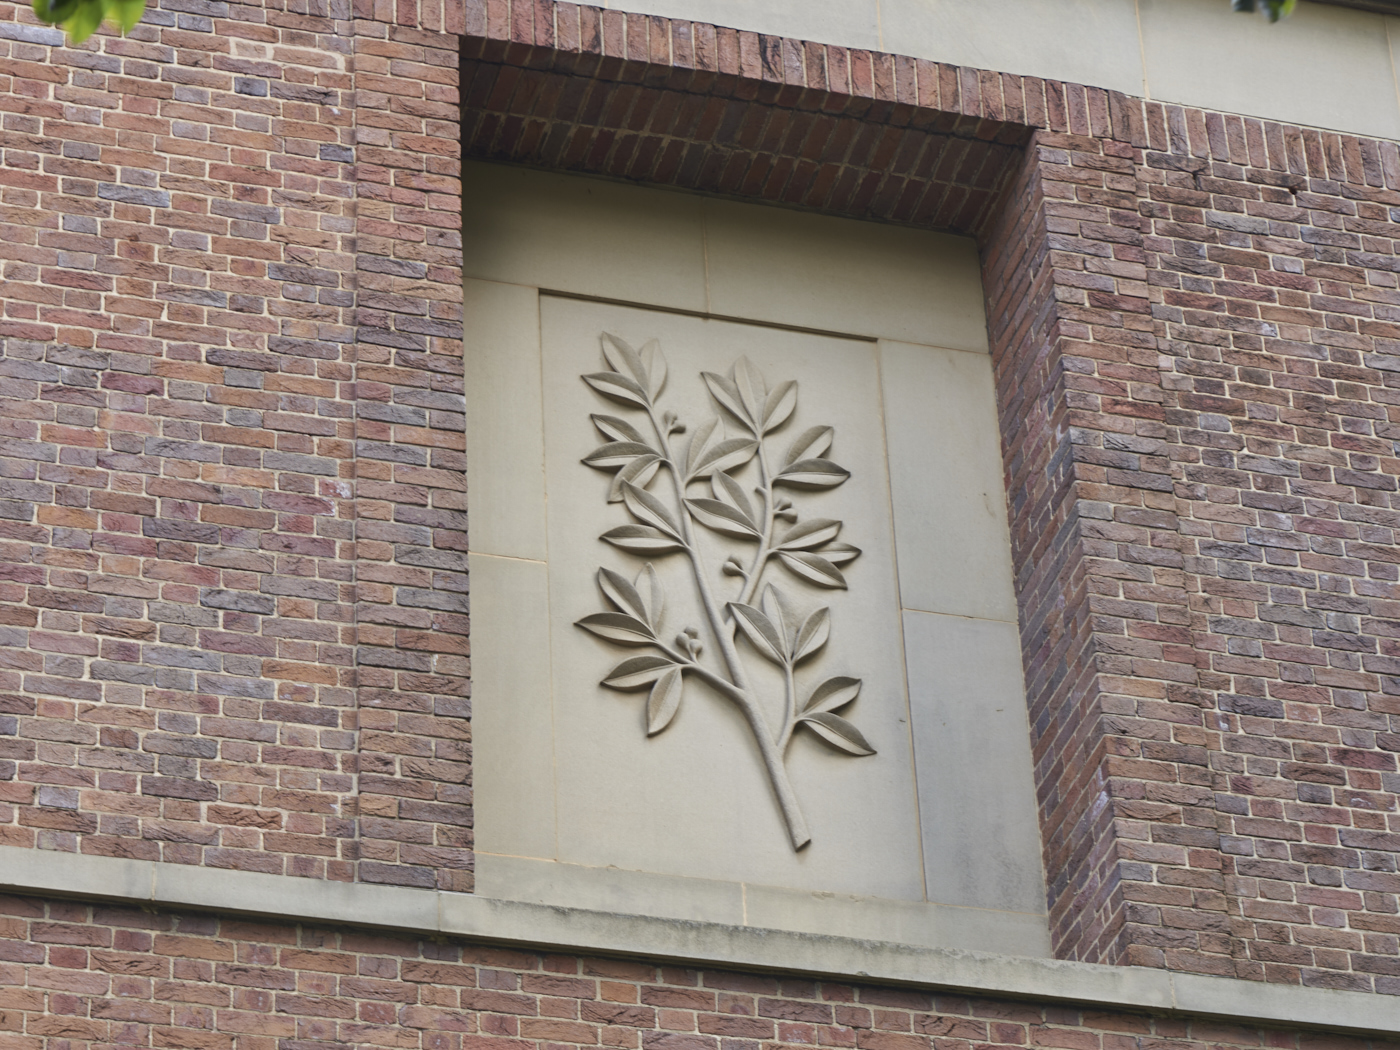 Carved stone panel set into the wall of the Barber Institute of Fine Arts by Gordon Herickx featuring a carving of a laurel